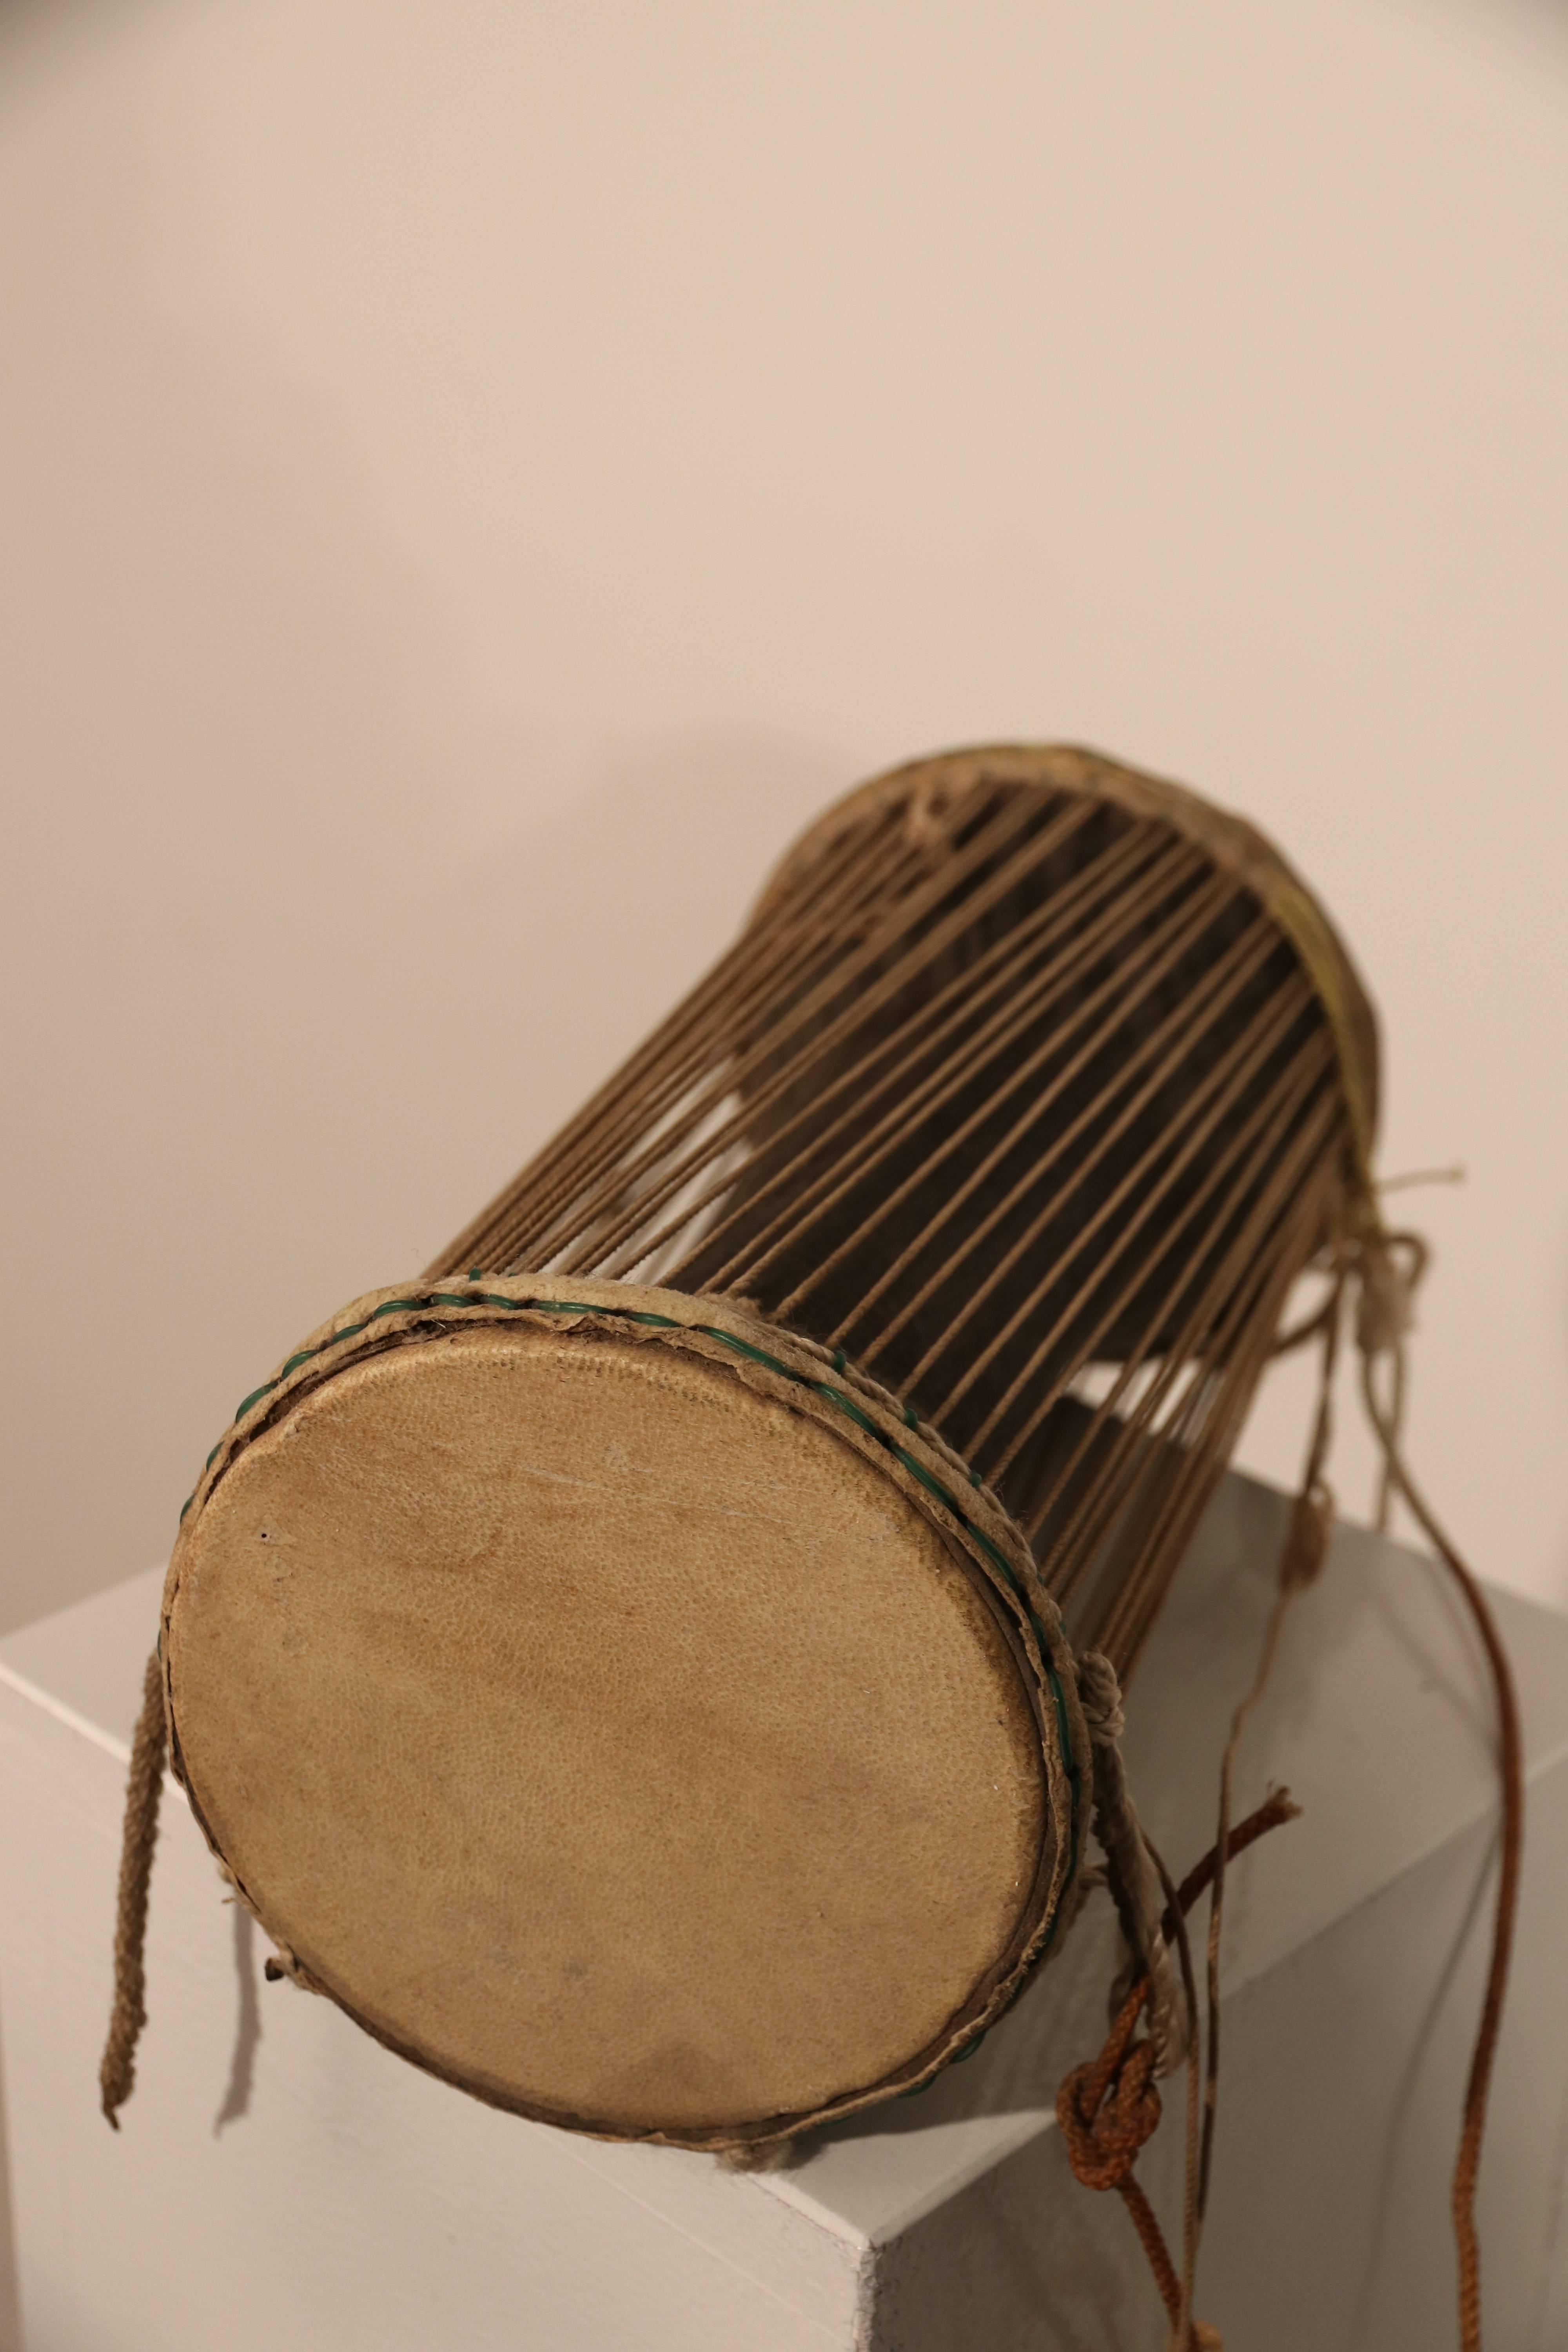 Tribal Antique Sub-Sahara African Talking Drum For Sale